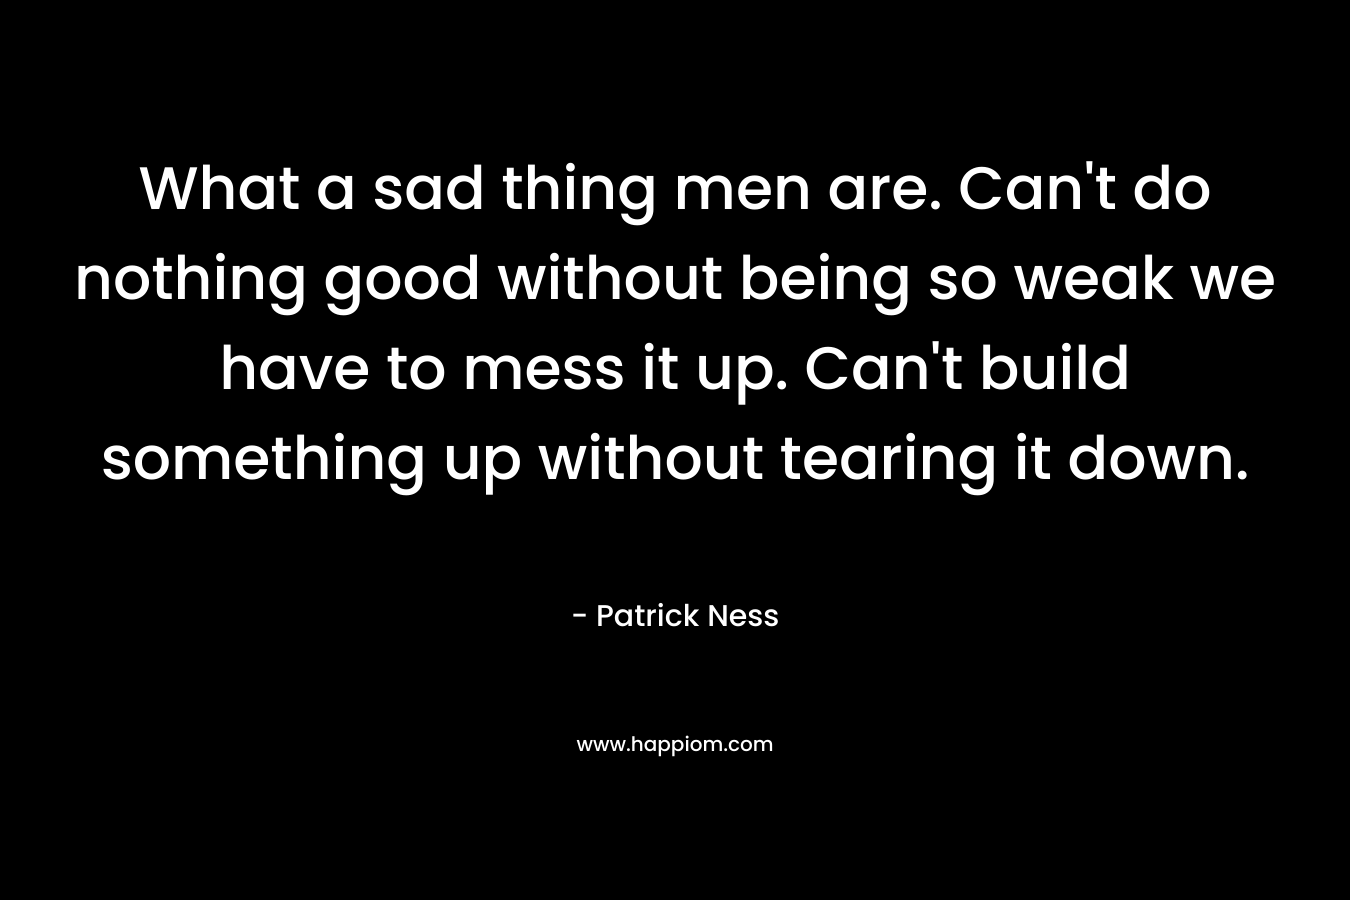 What a sad thing men are. Can't do nothing good without being so weak we have to mess it up. Can't build something up without tearing it down.